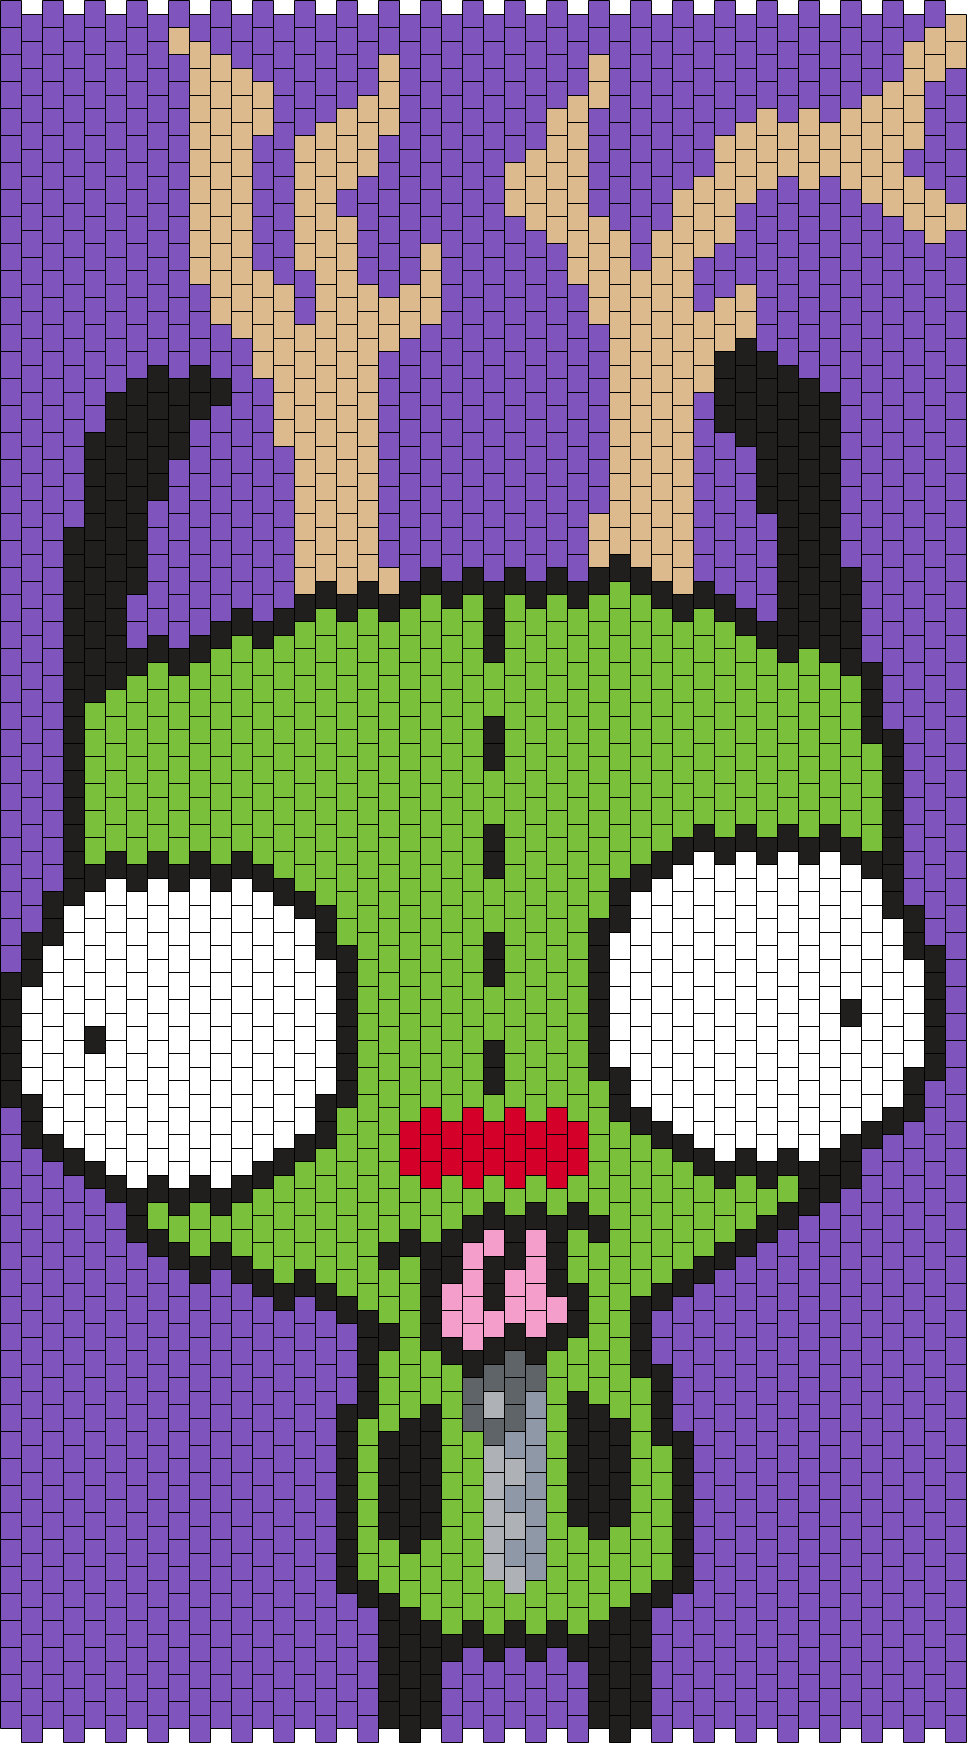 Gir As Rudolph The Red-Nosed Reindeer (from Invader Zim) (Multi)